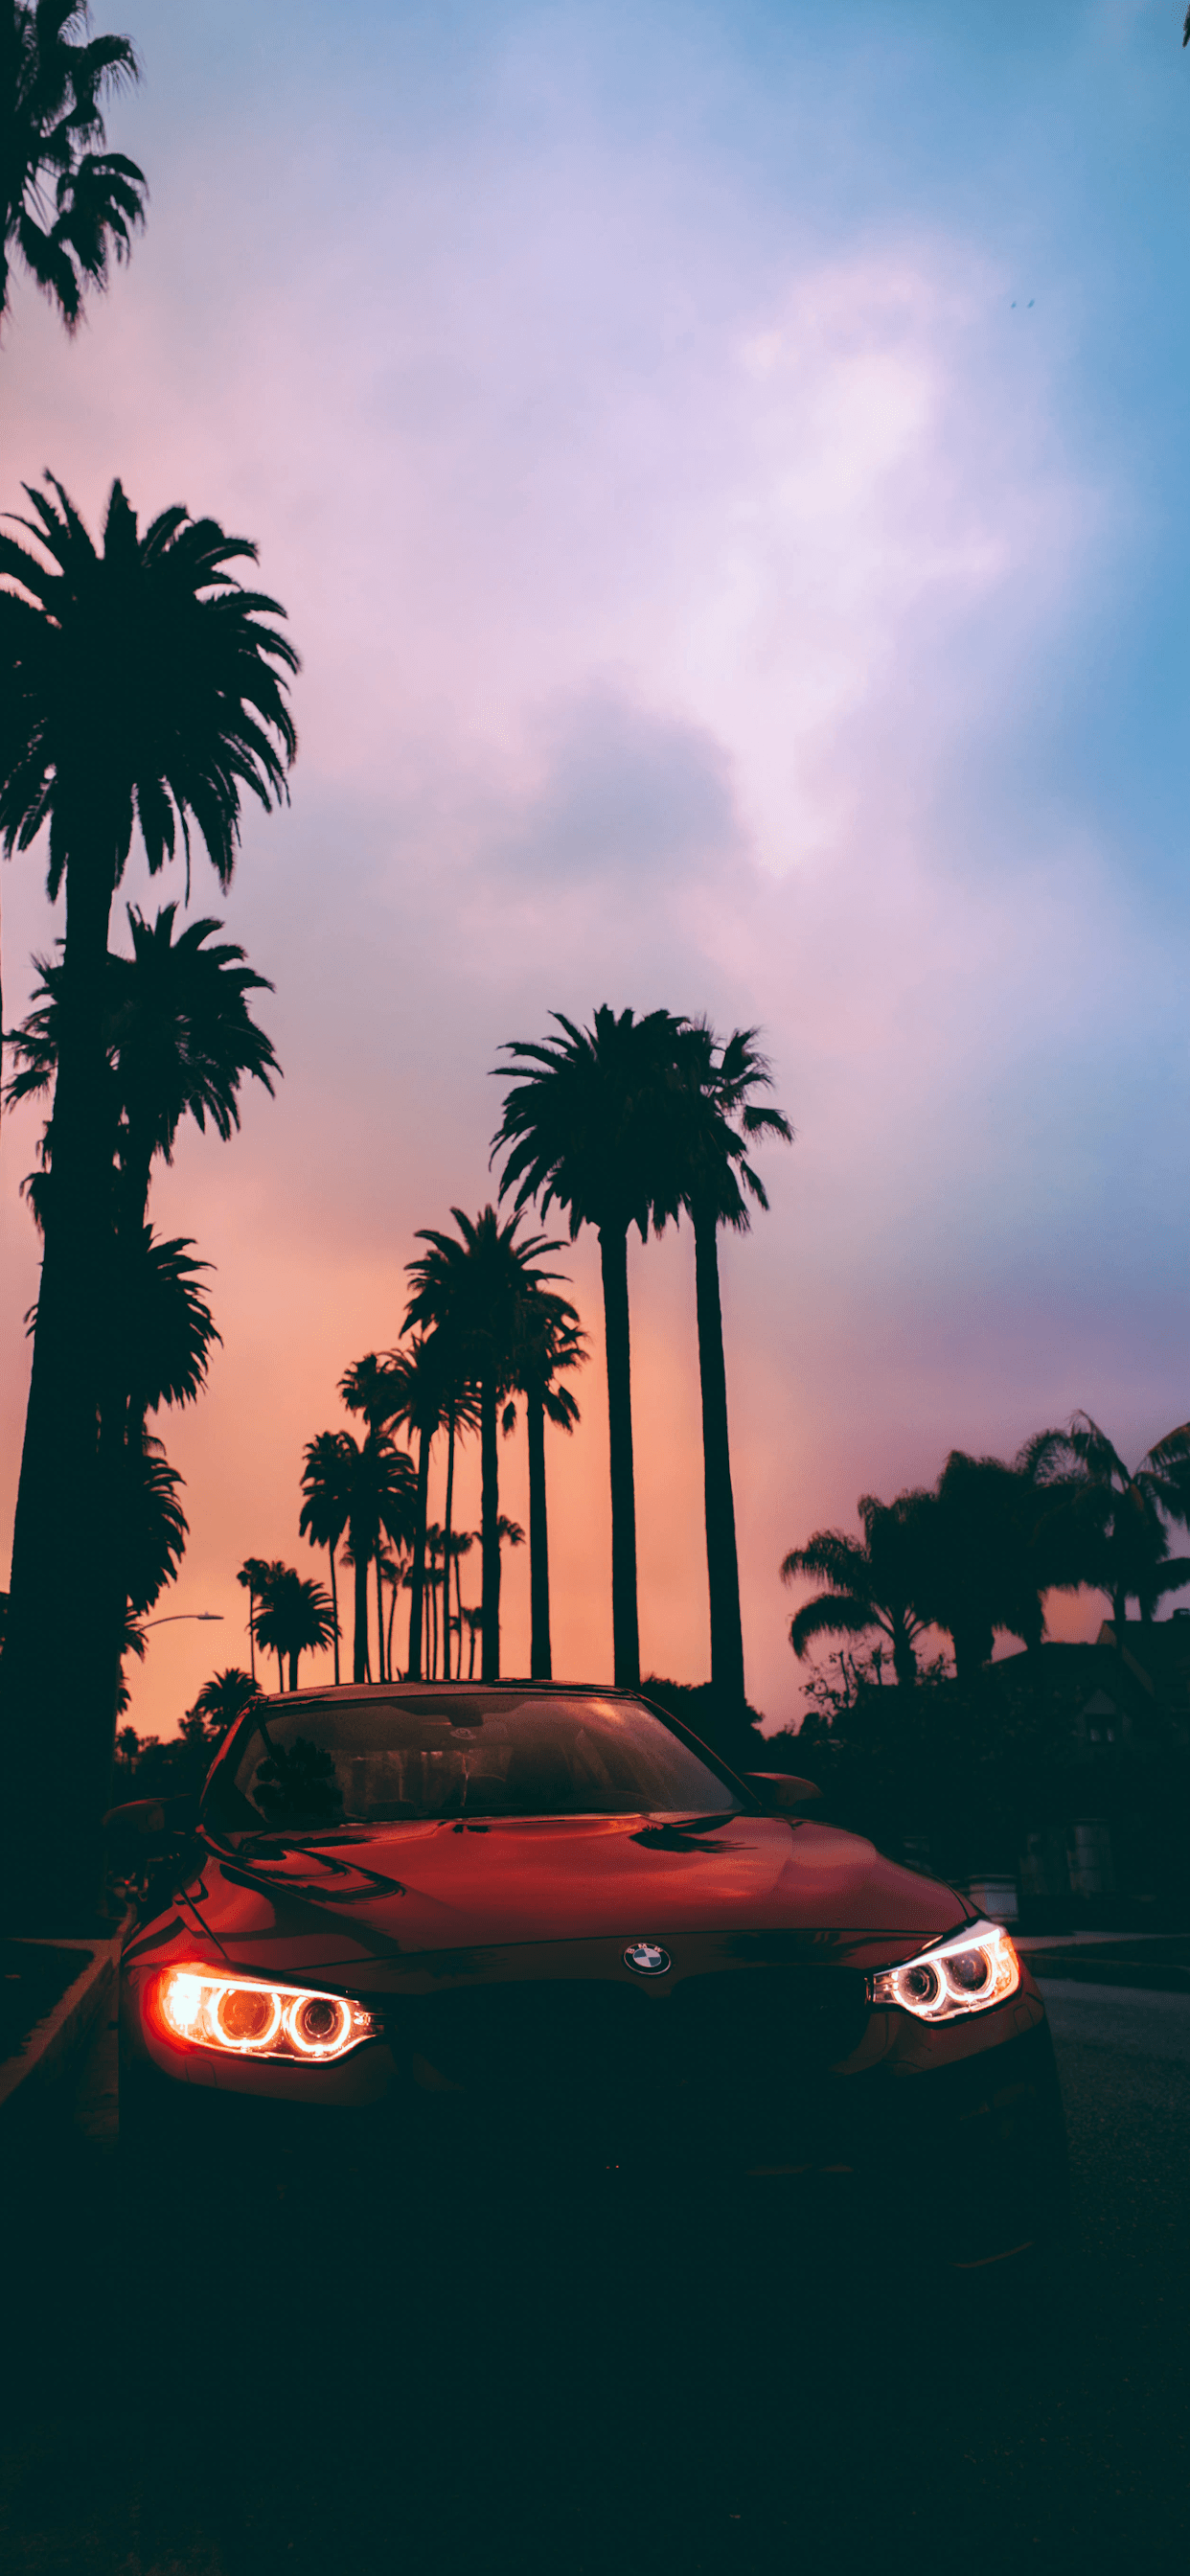 Hd Car Wallpapers For Iphone 7